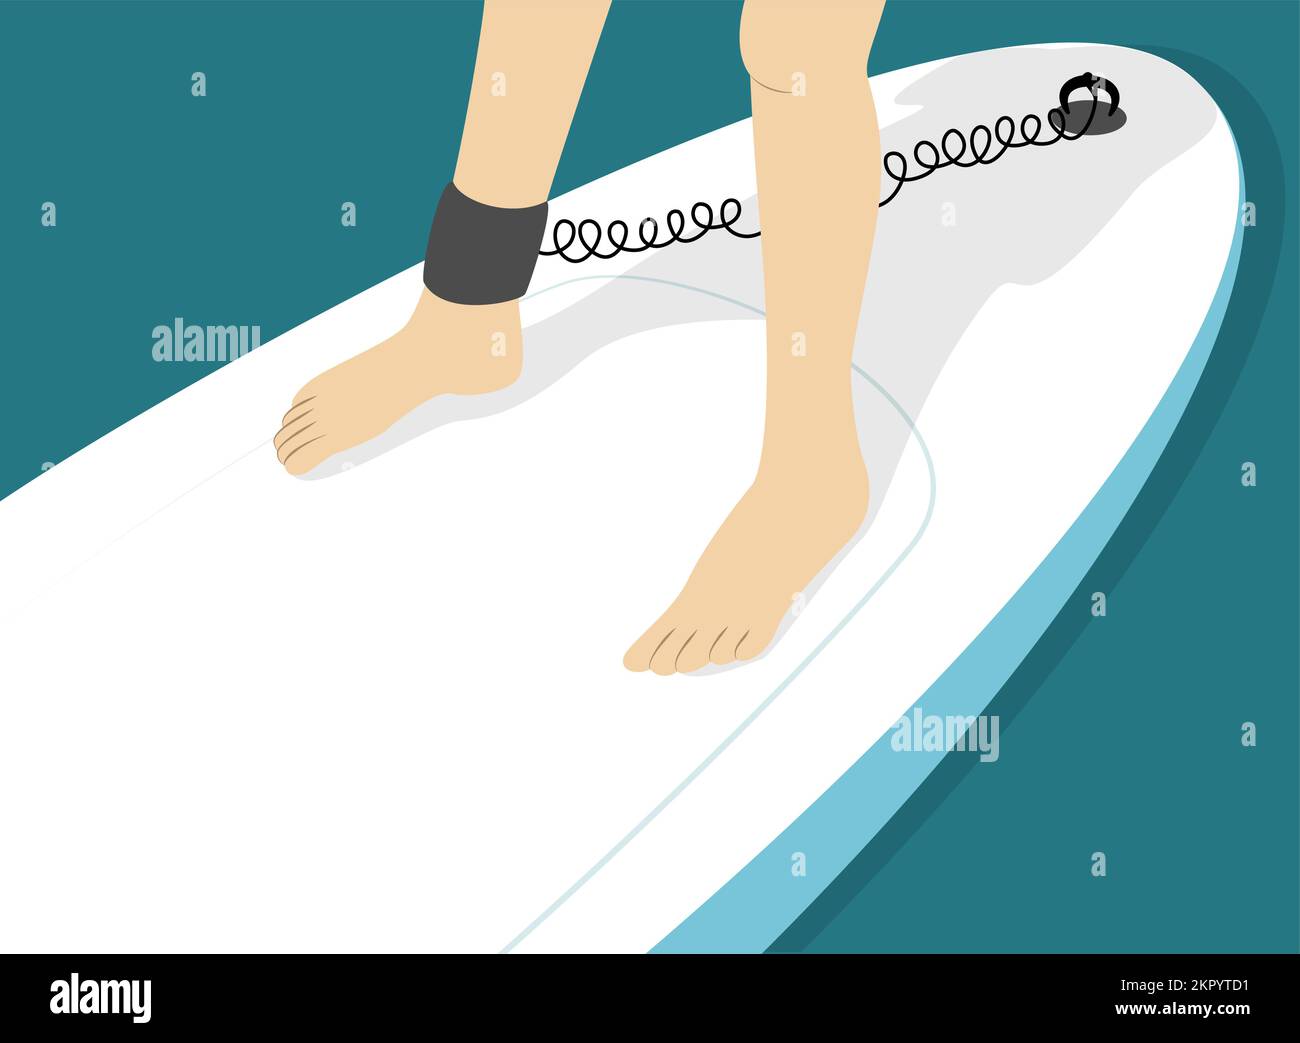 Paddleboarding safety connector for feet to connect the human to the board. Legs of person standing on sup board. Stock Vector